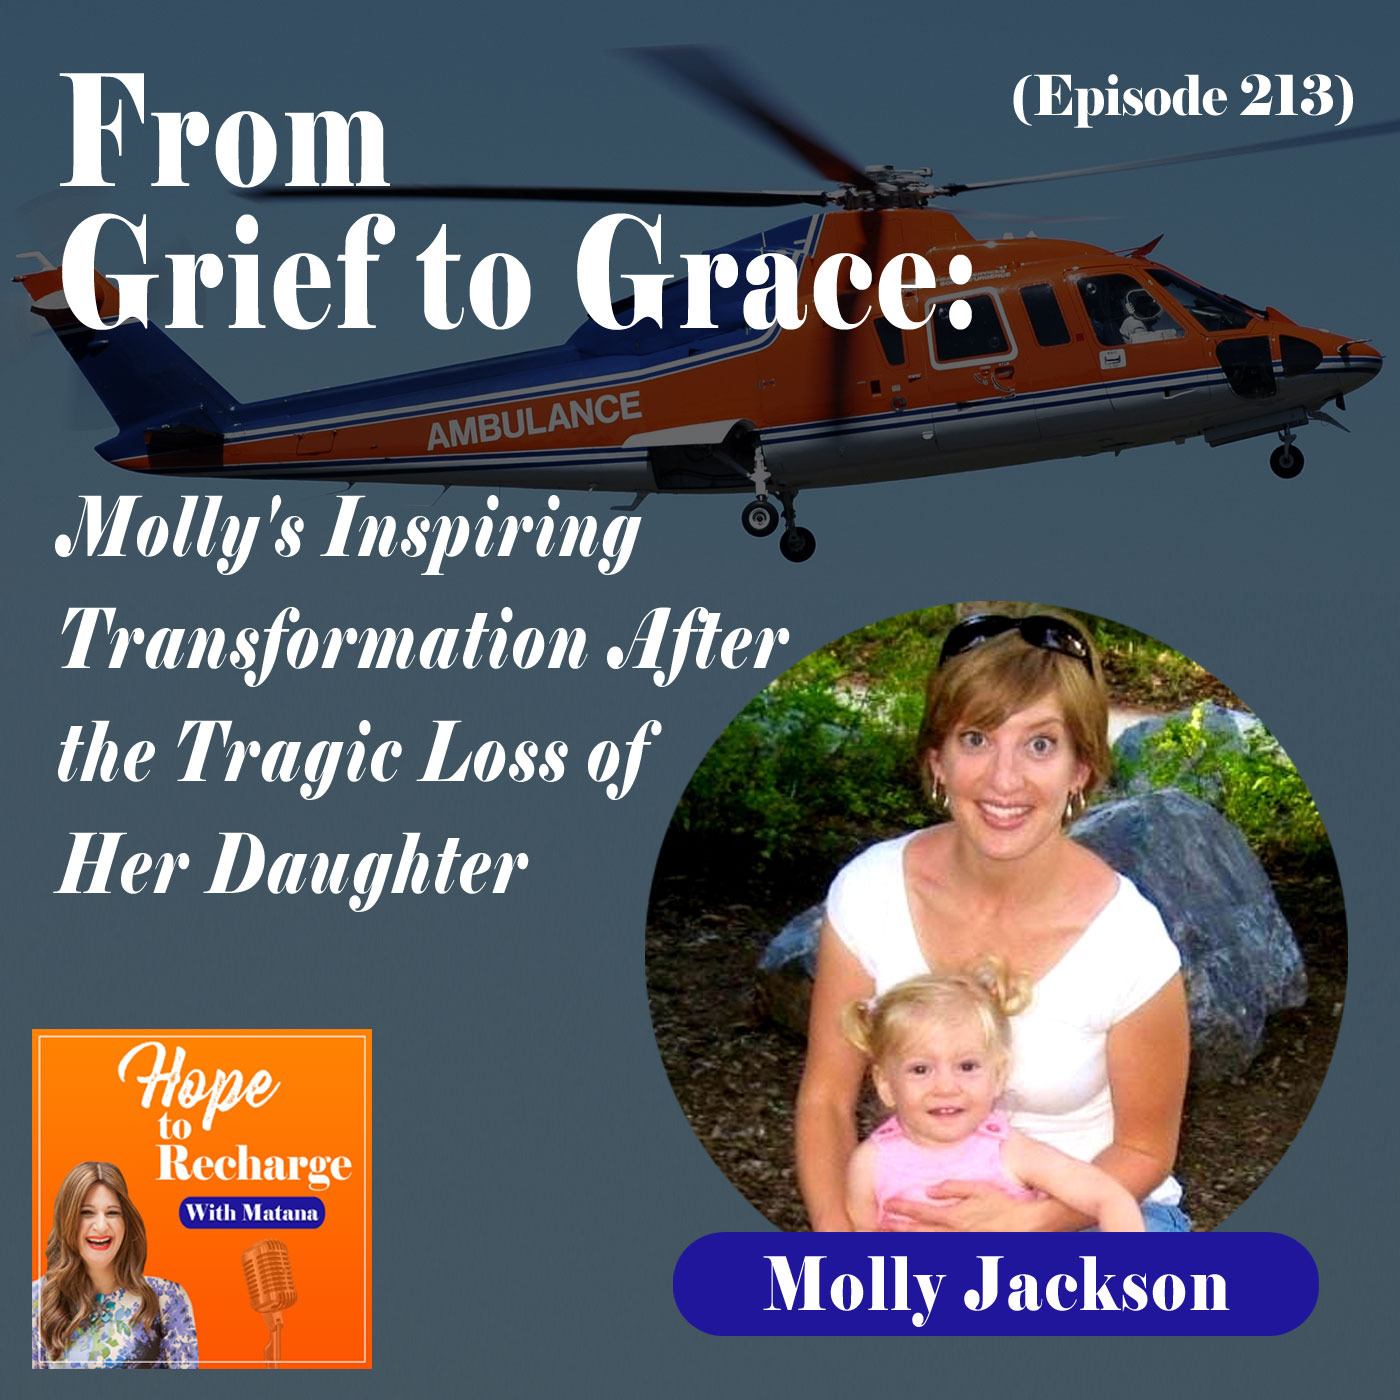 From Grief to Grace: Molly's Inspiring Transformation After the Tragic Loss of Her Daughter (Molly Jackson)